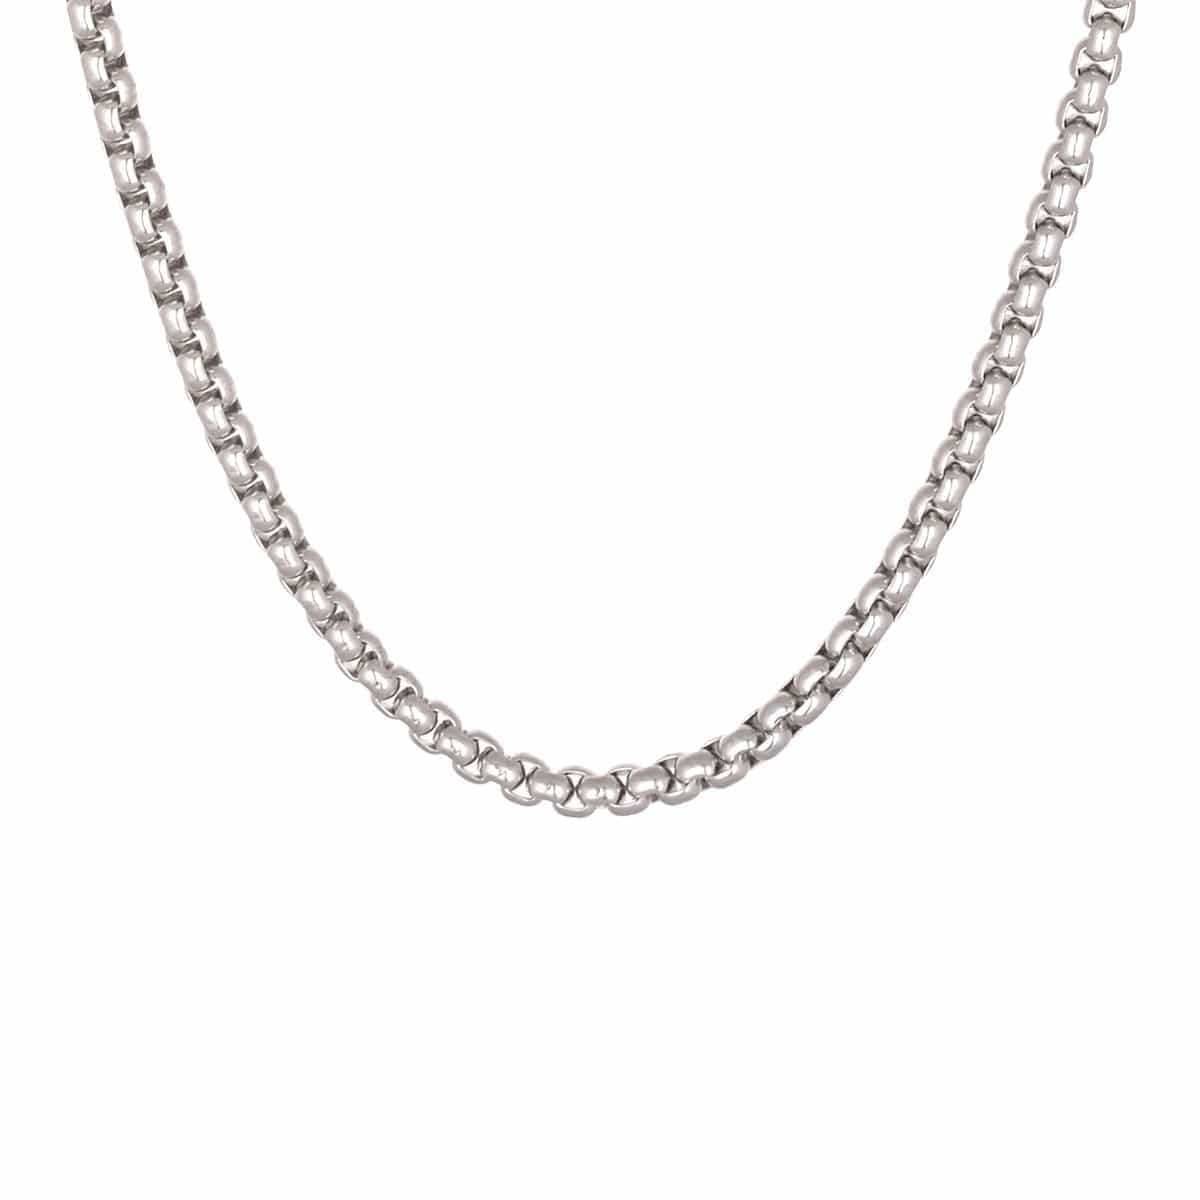 INOX JEWELRY Chains Silver Tone Stainless Steel 5mm Polished Bold Box Link Chain